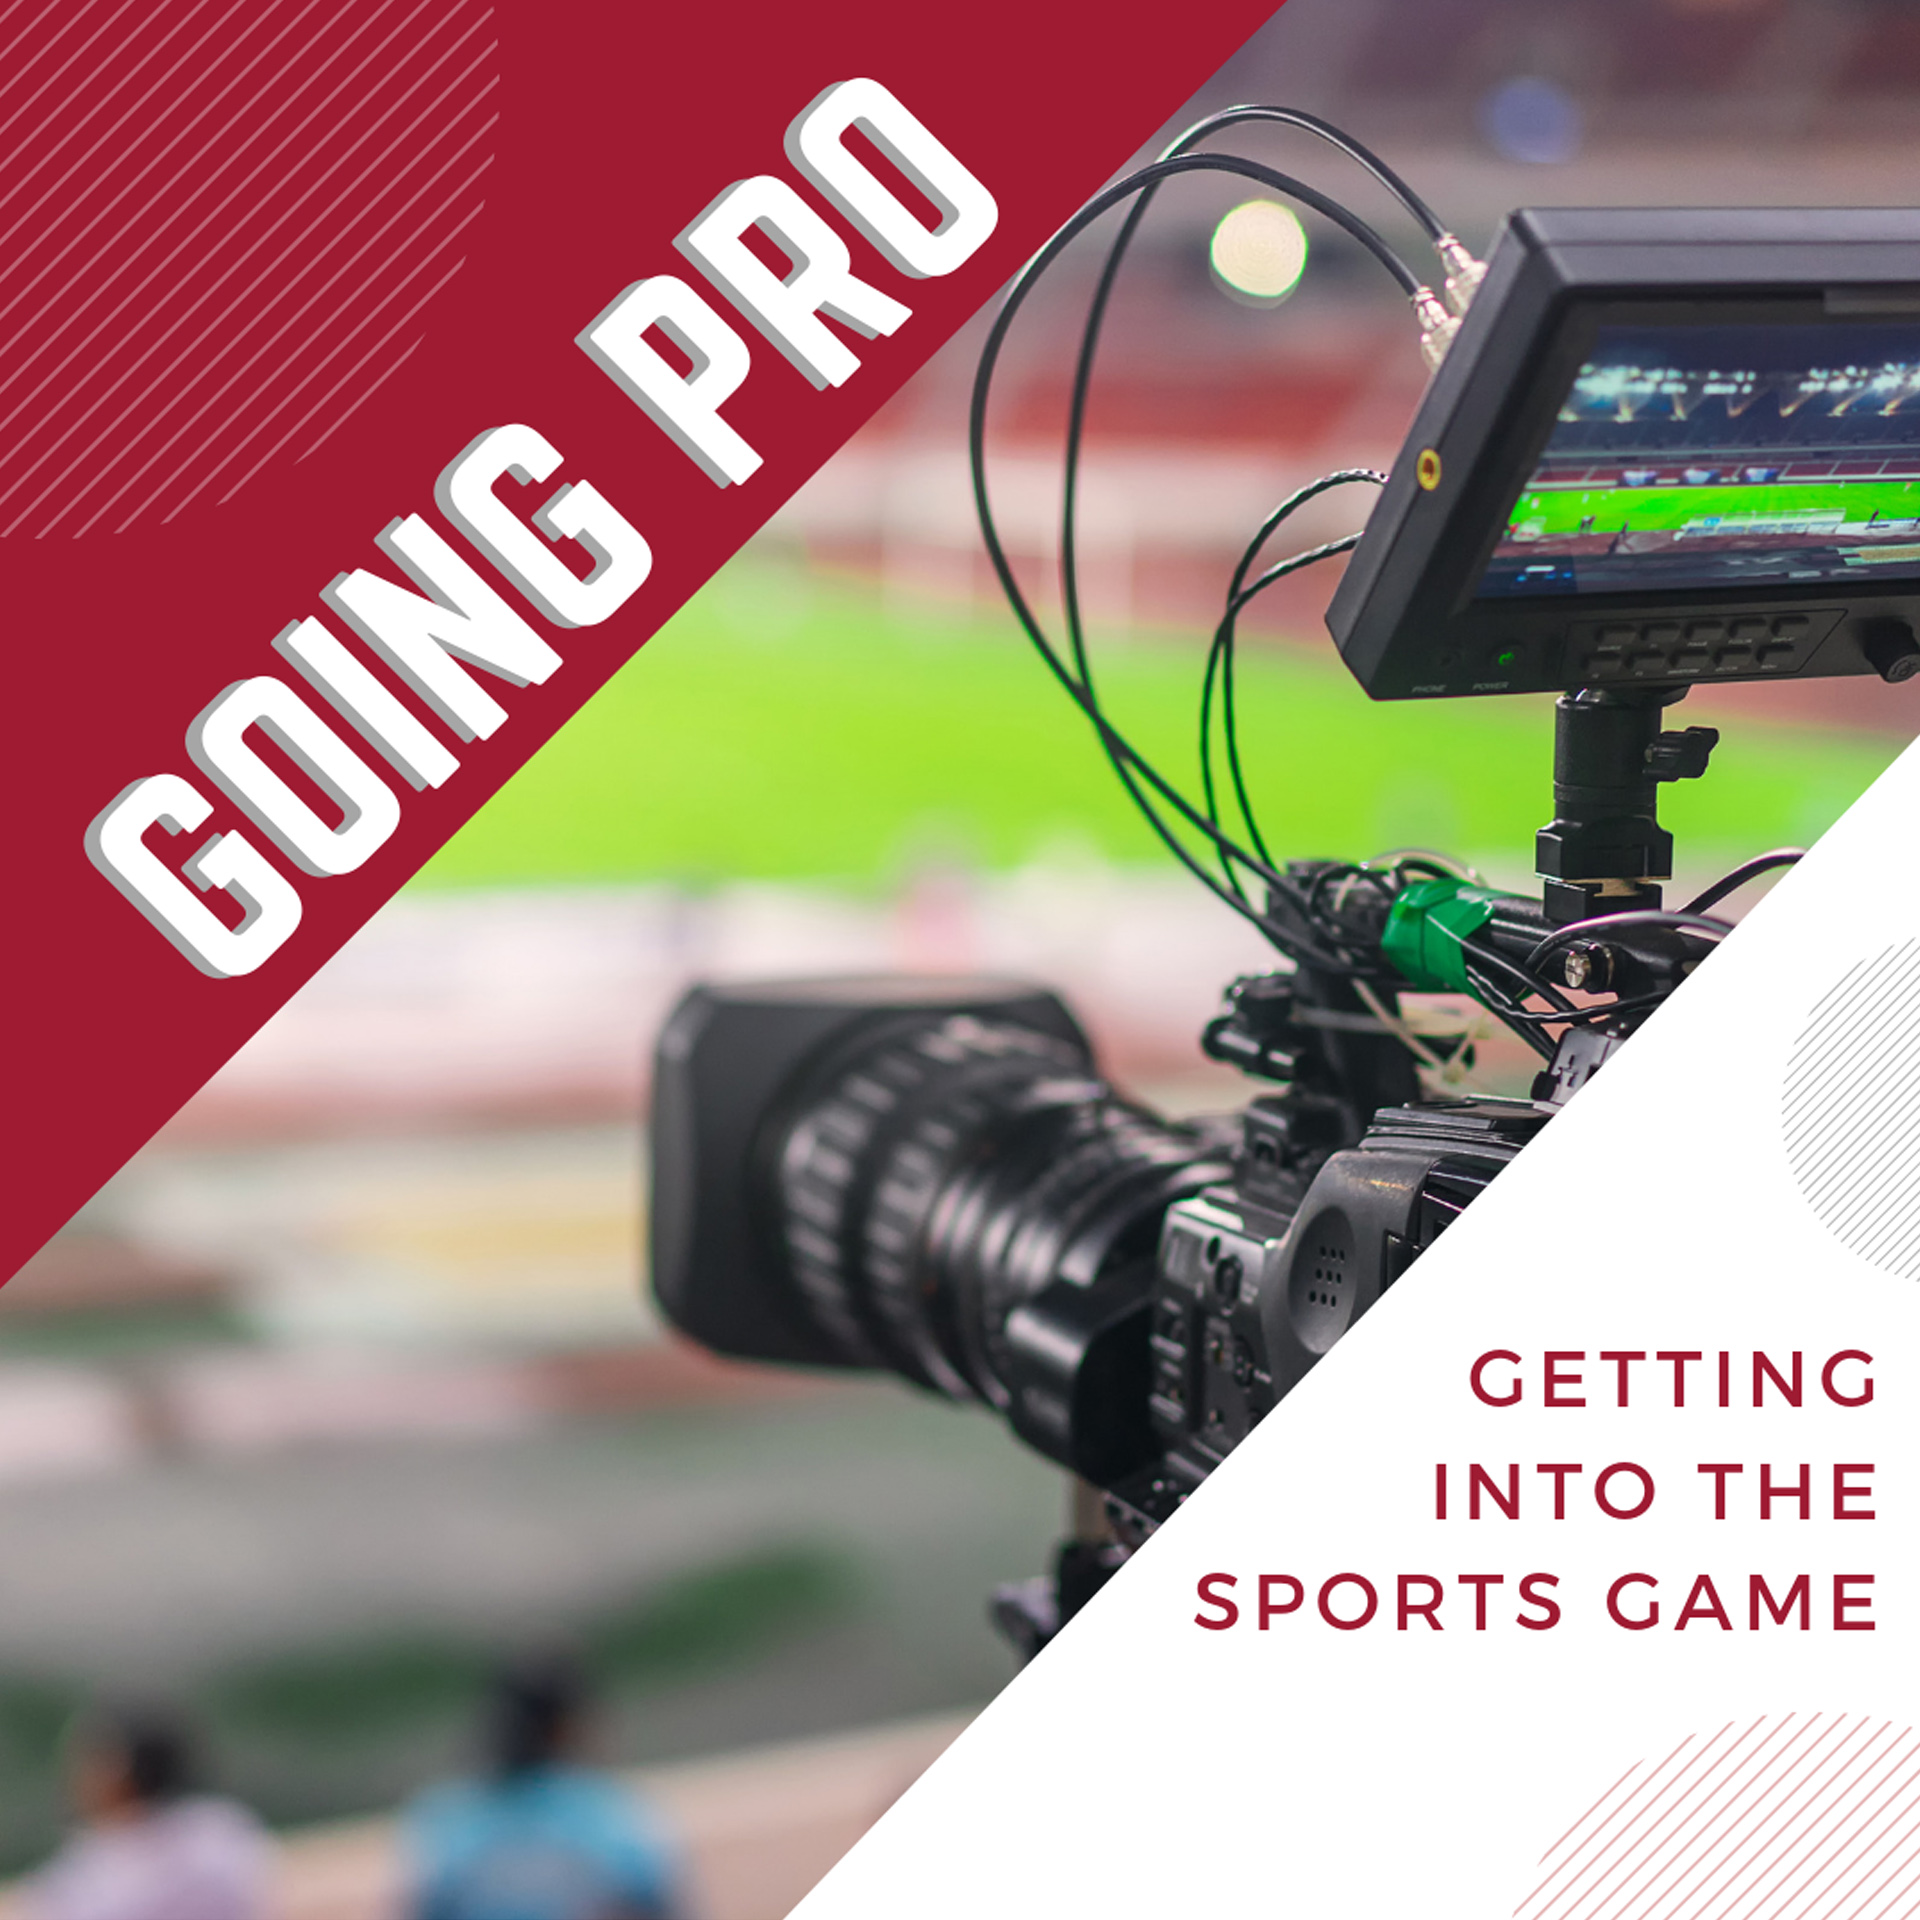 Network with Sports Industry Professionals at Going Pro Event